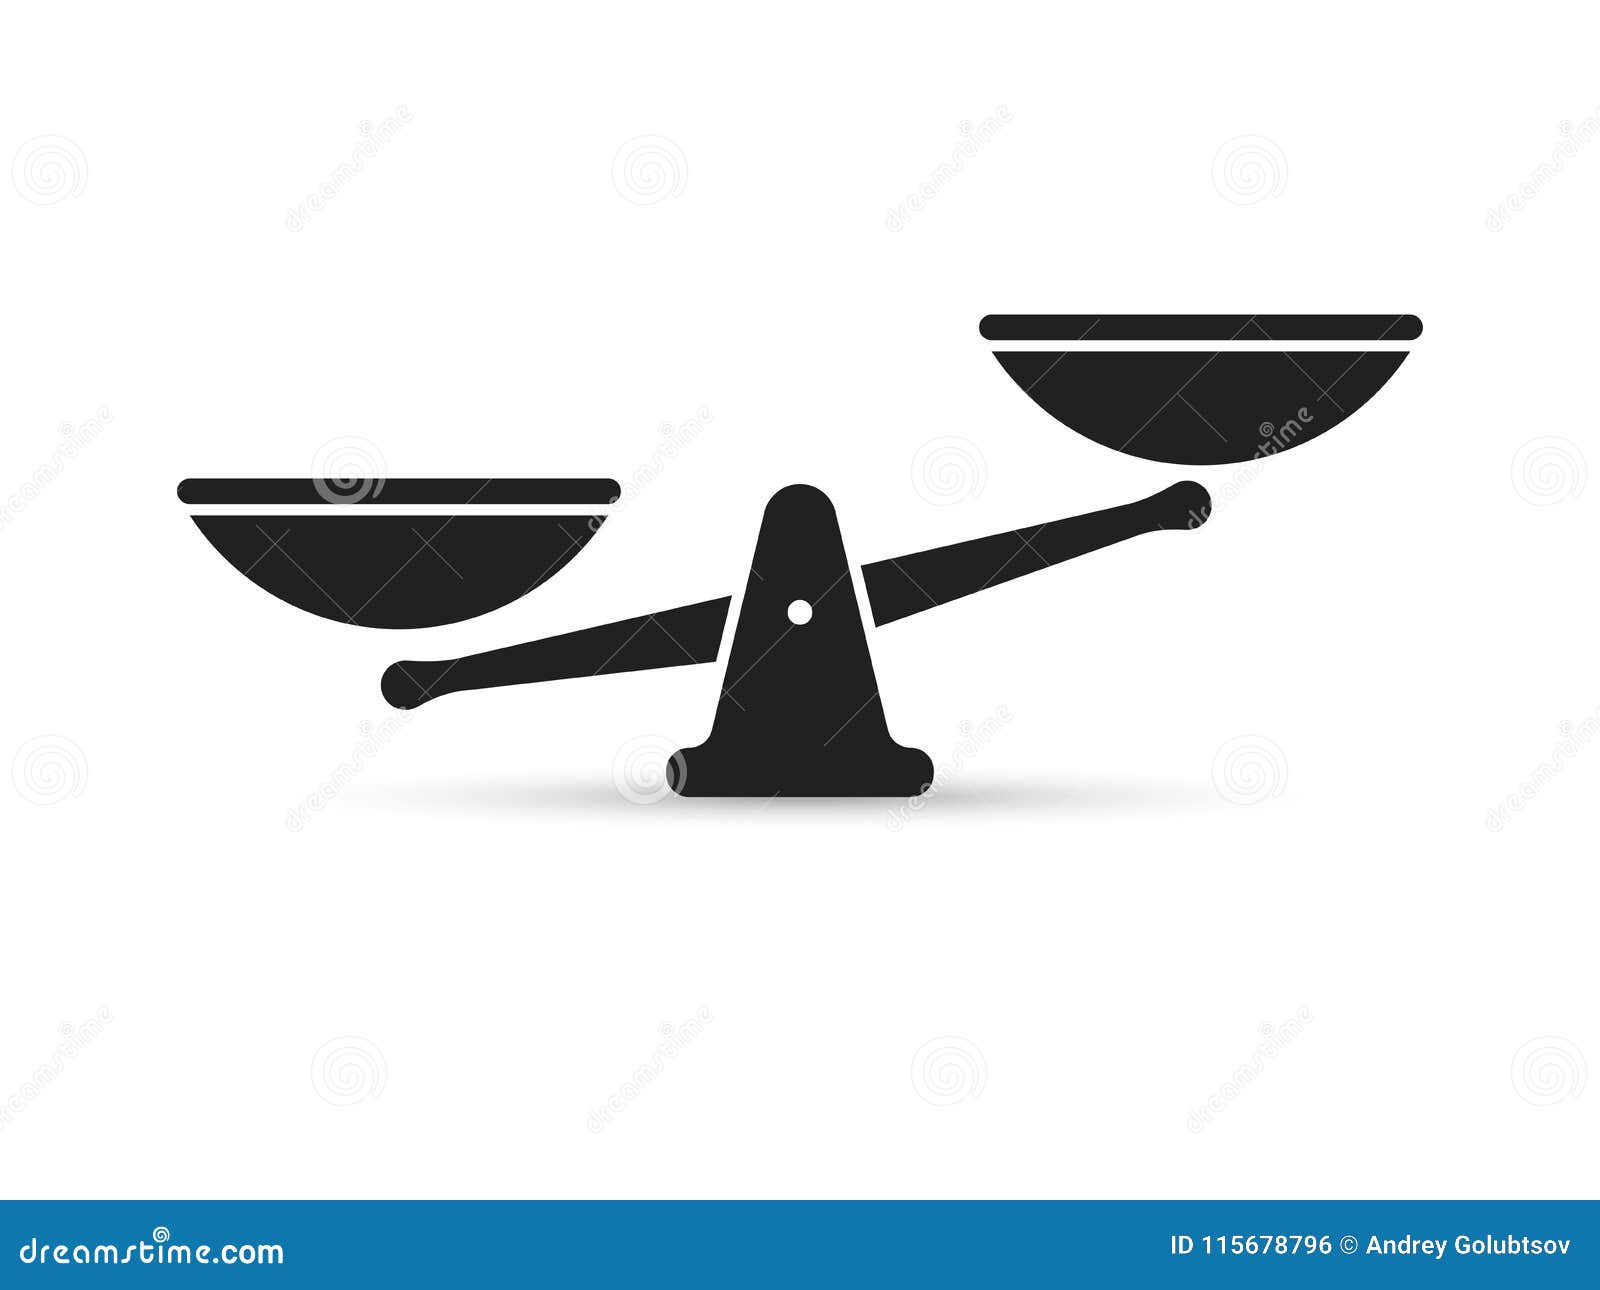 https://thumbs.dreamstime.com/z/scale-vector-icon-balance-weight-justice-scales-law-logo-115678796.jpg